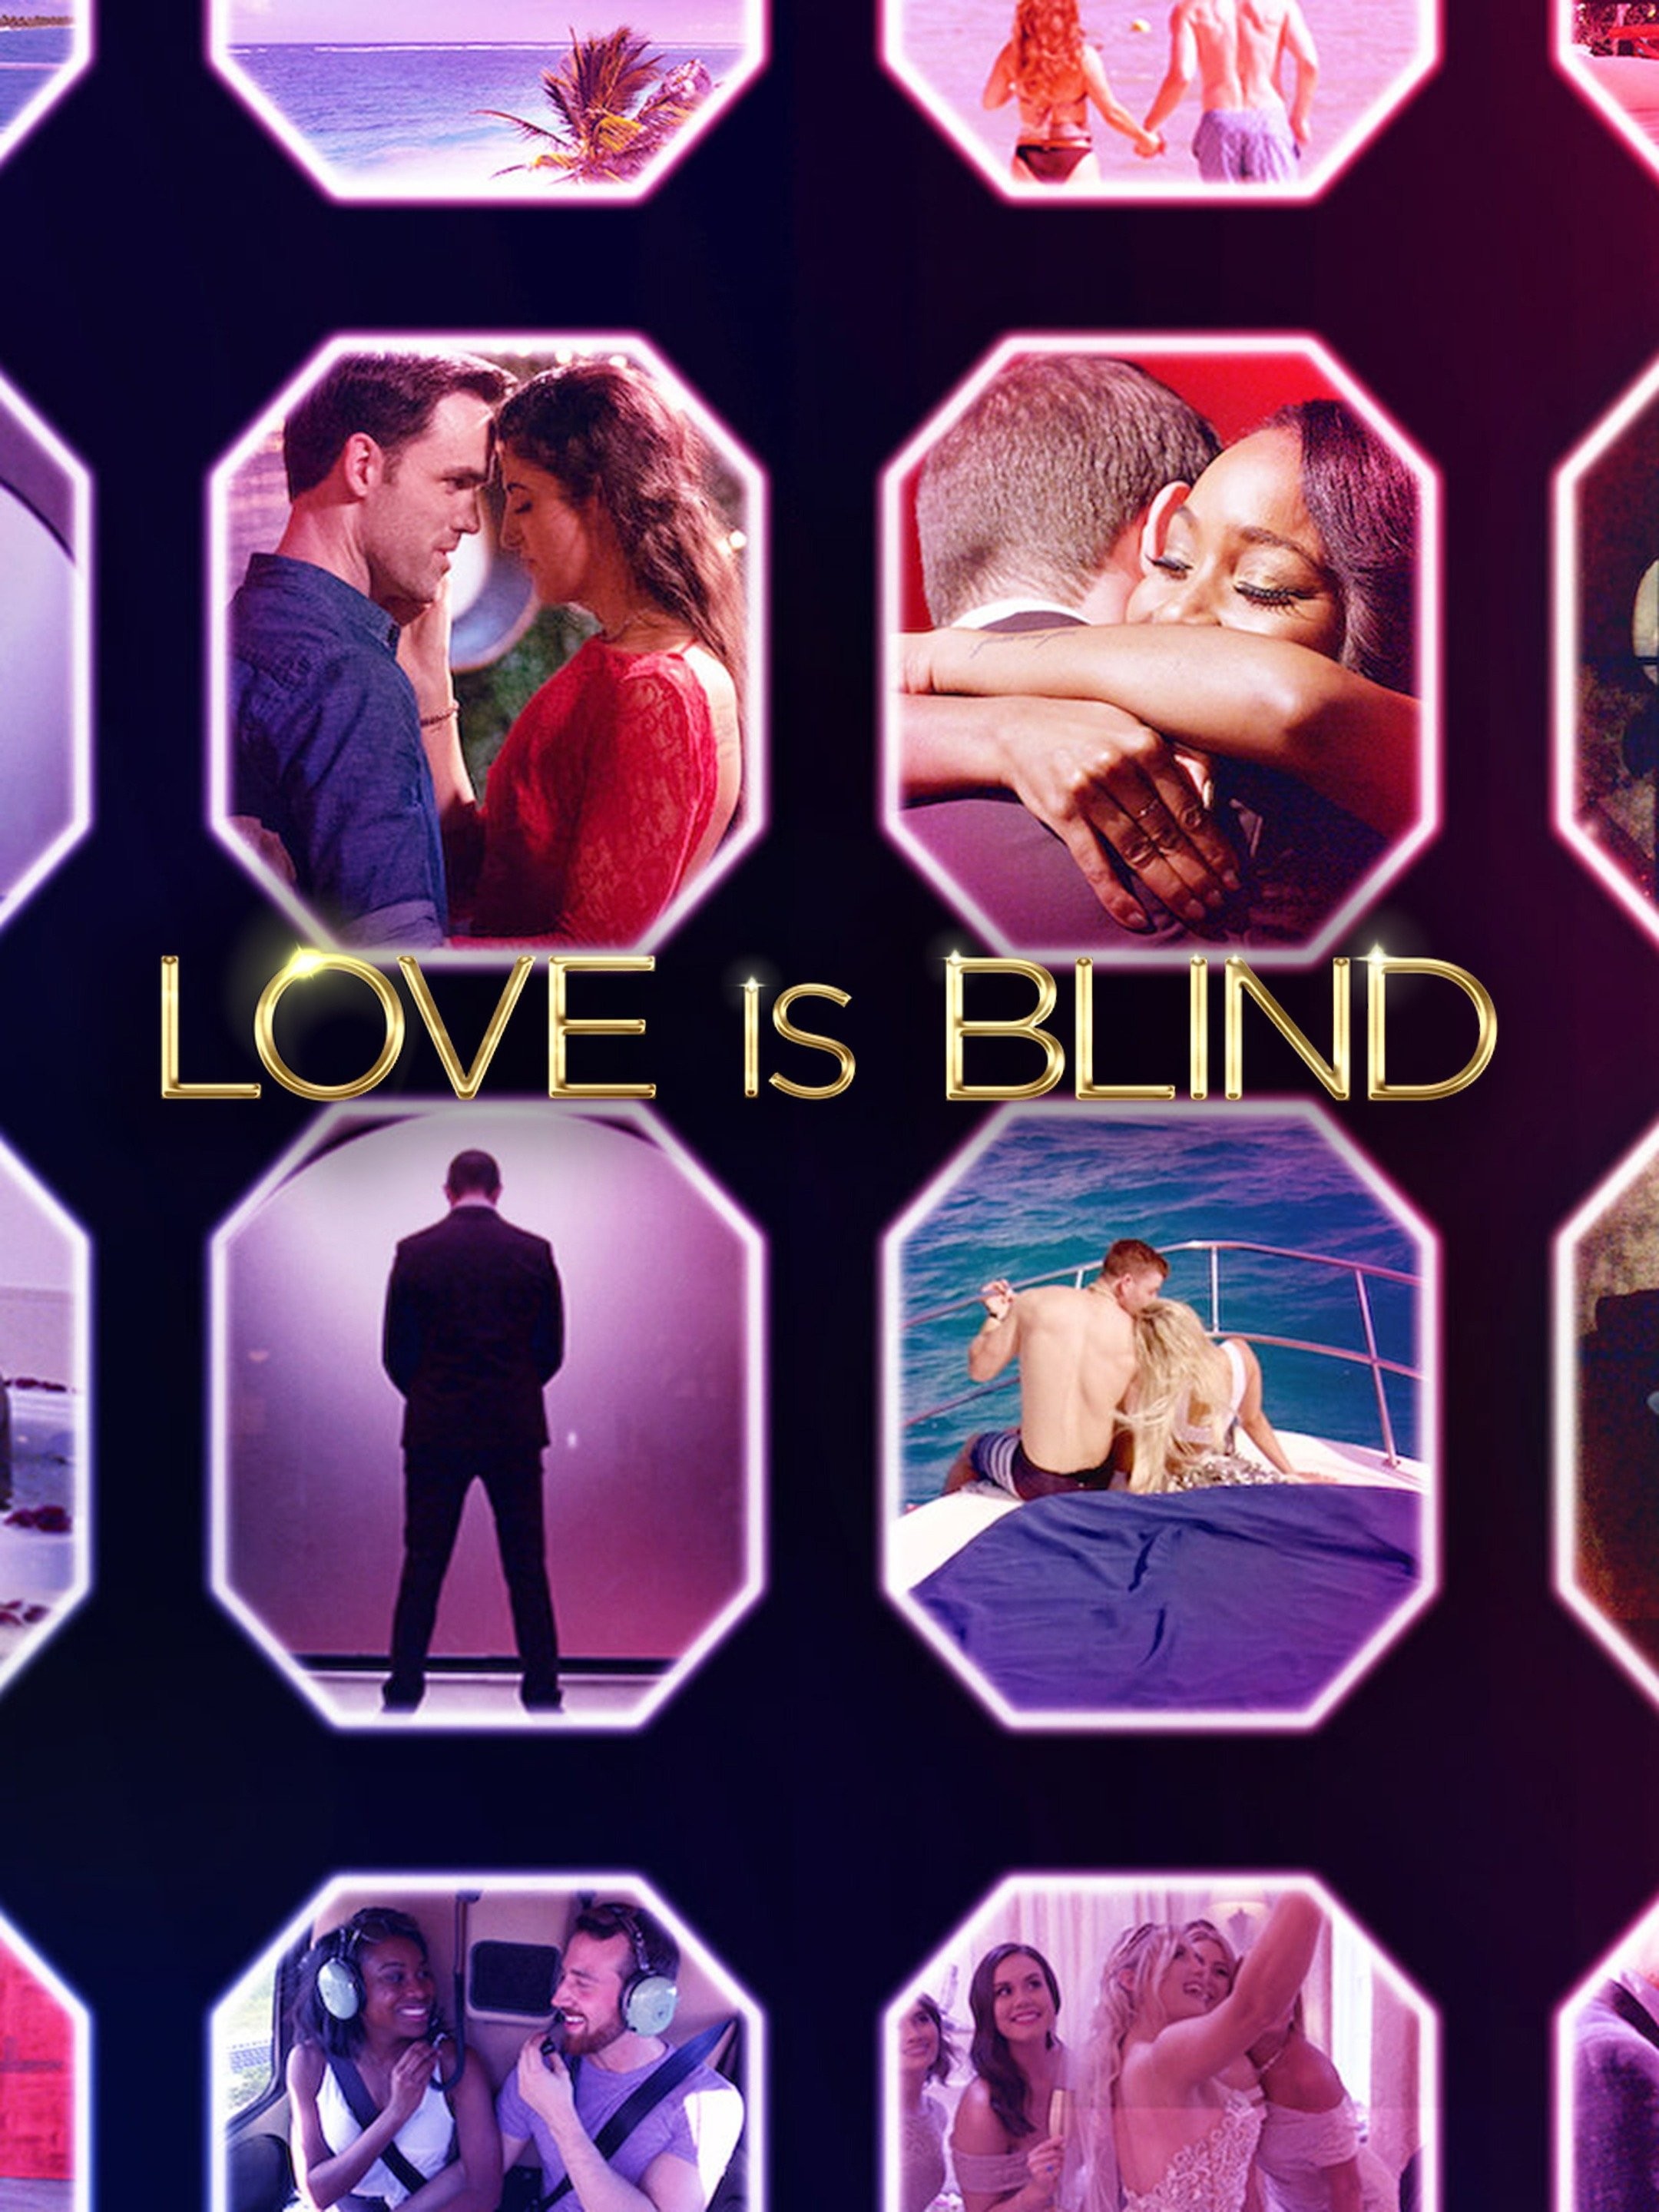 If Love is Blind was a dating app #MatterDating #LoveIs